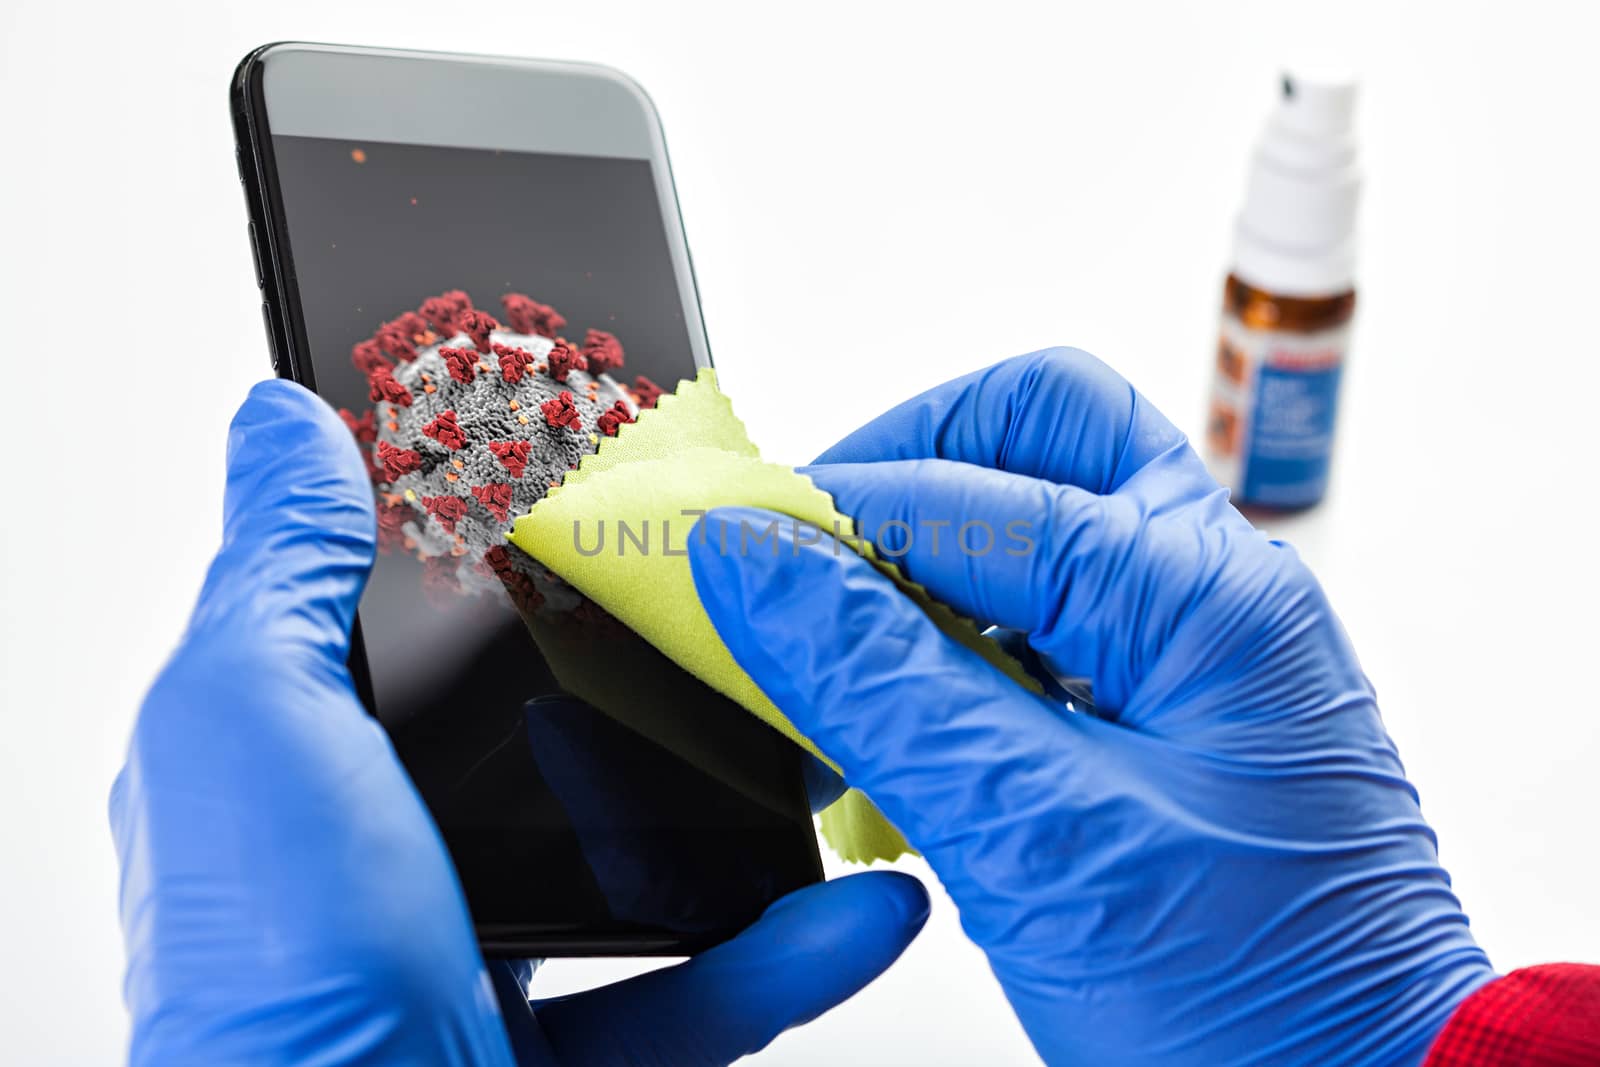 Hand in gloves wiping cellphone screen with green cloth, illustration of Coronavirus COVID-19 virus disease infection spread prevention and protection,global pandemic outbreak cautionary measures 